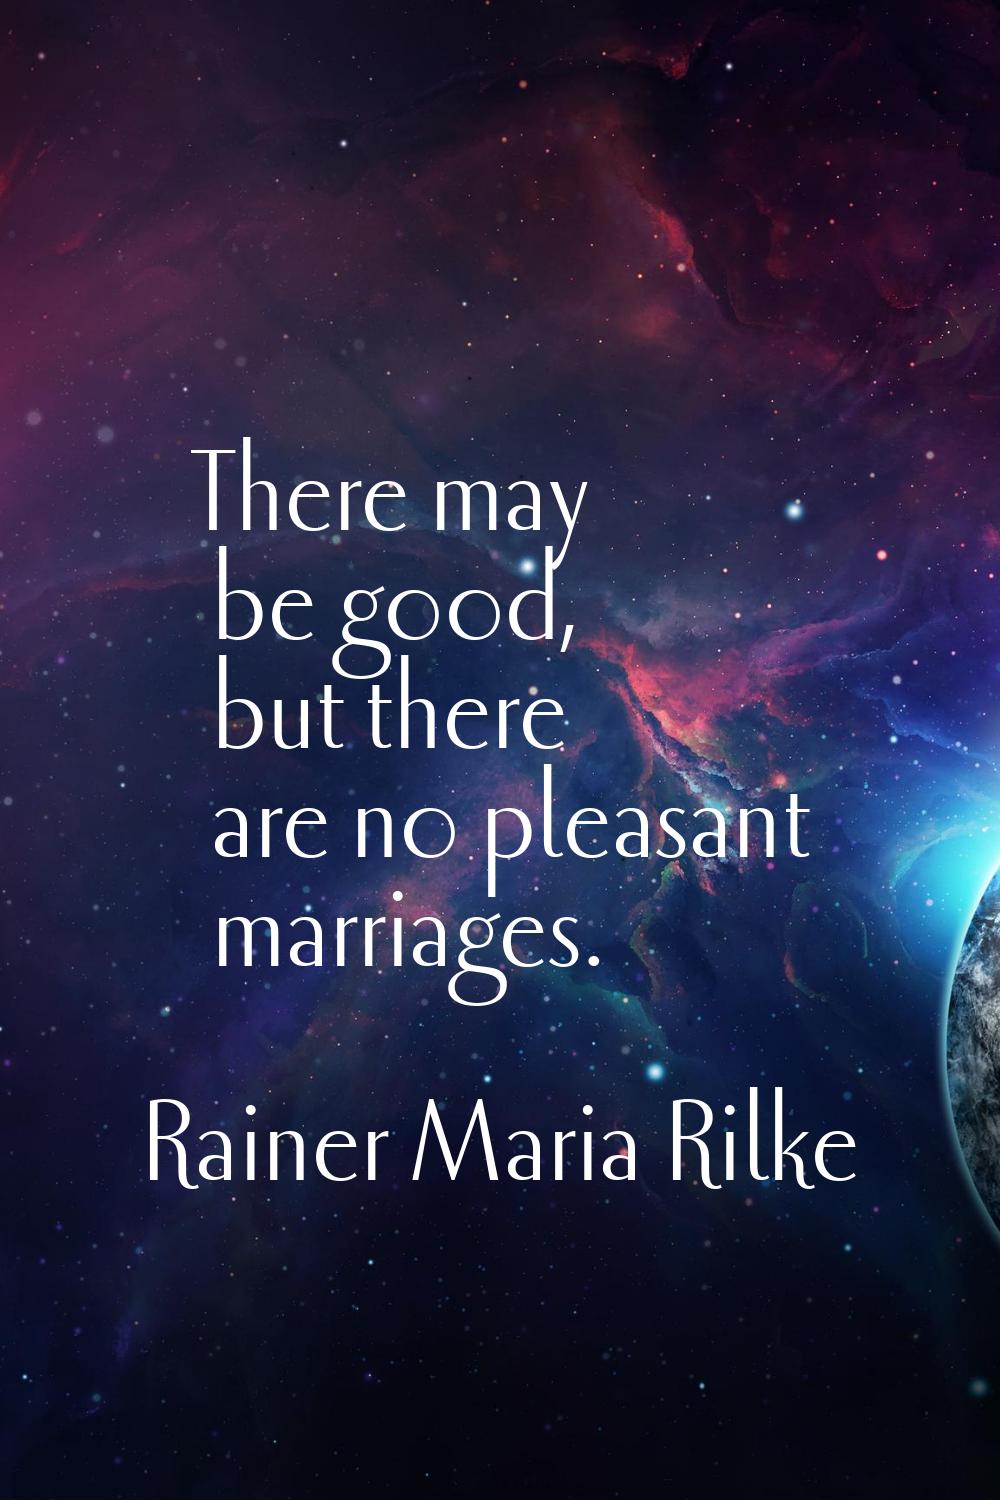 There may be good, but there are no pleasant marriages.